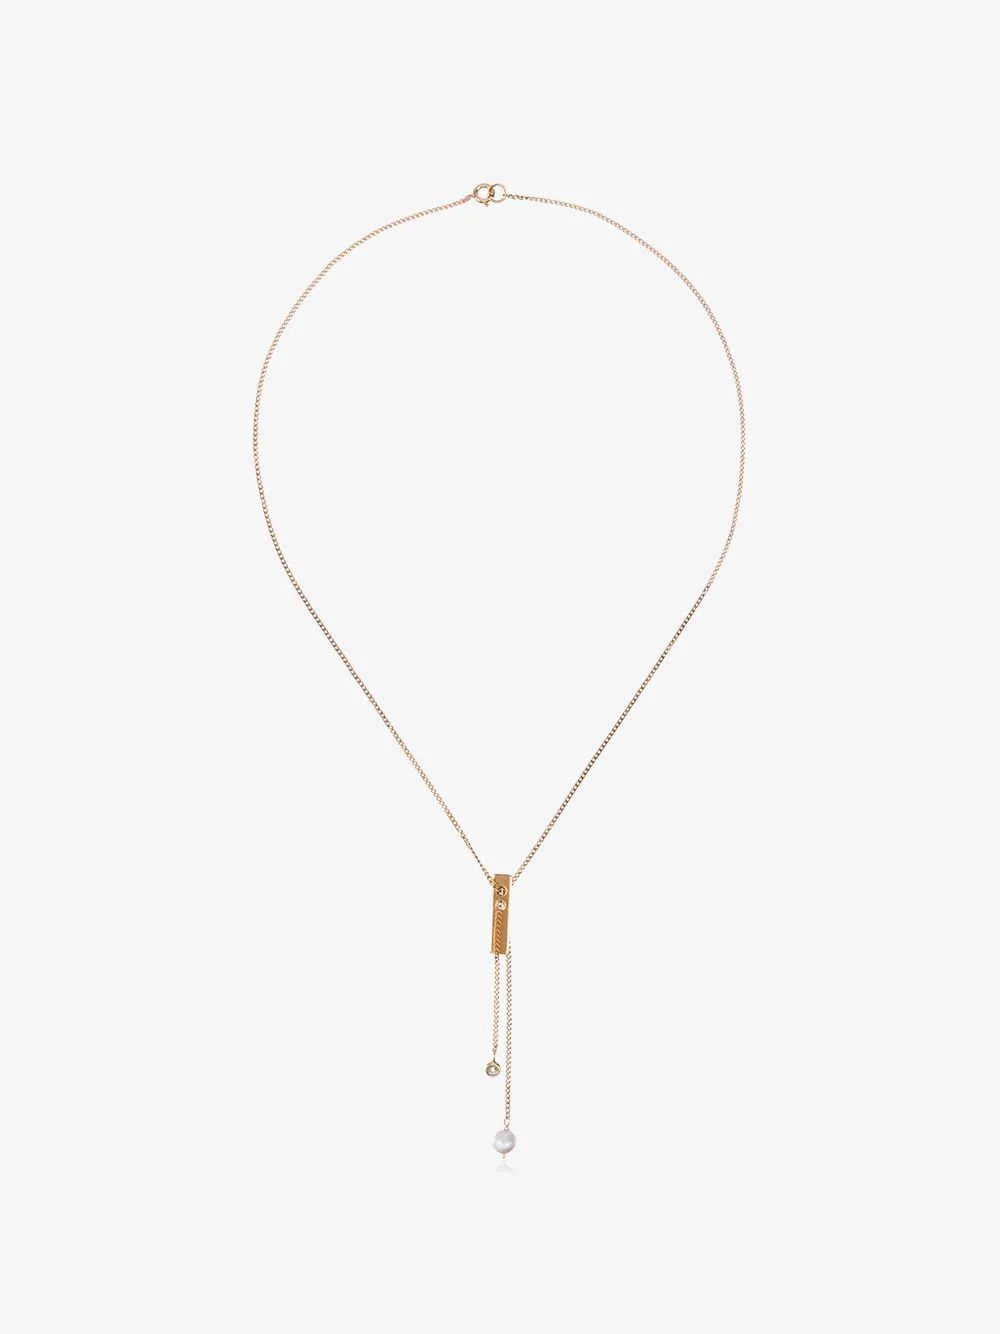 Vibe Harsl0f Gold Diamond and Pearl Necklace | Browns Fashion